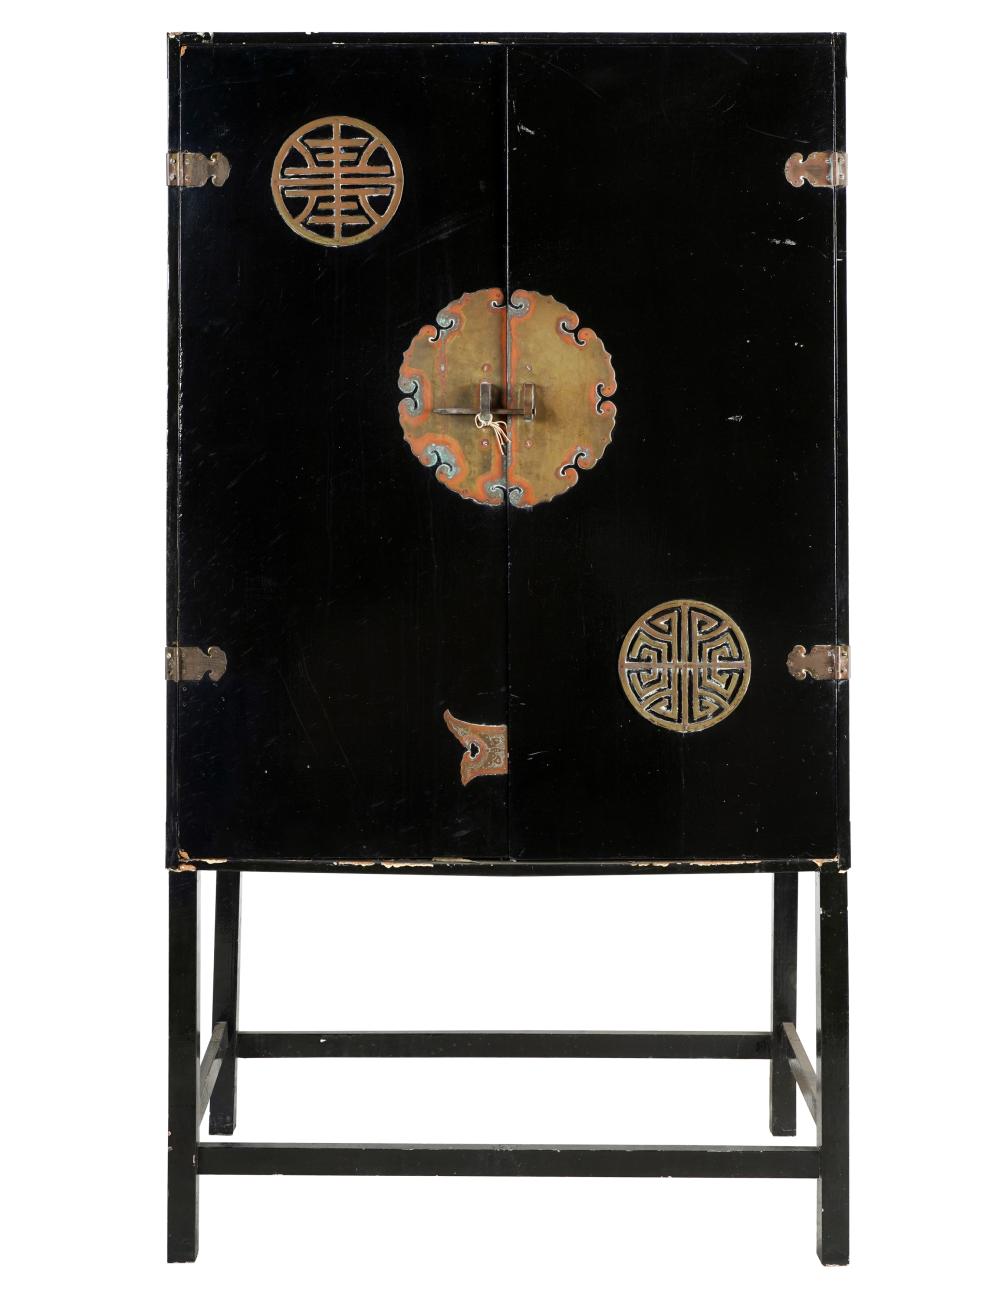 CHINESE-STYLE BLACK LACQUERED WOOD